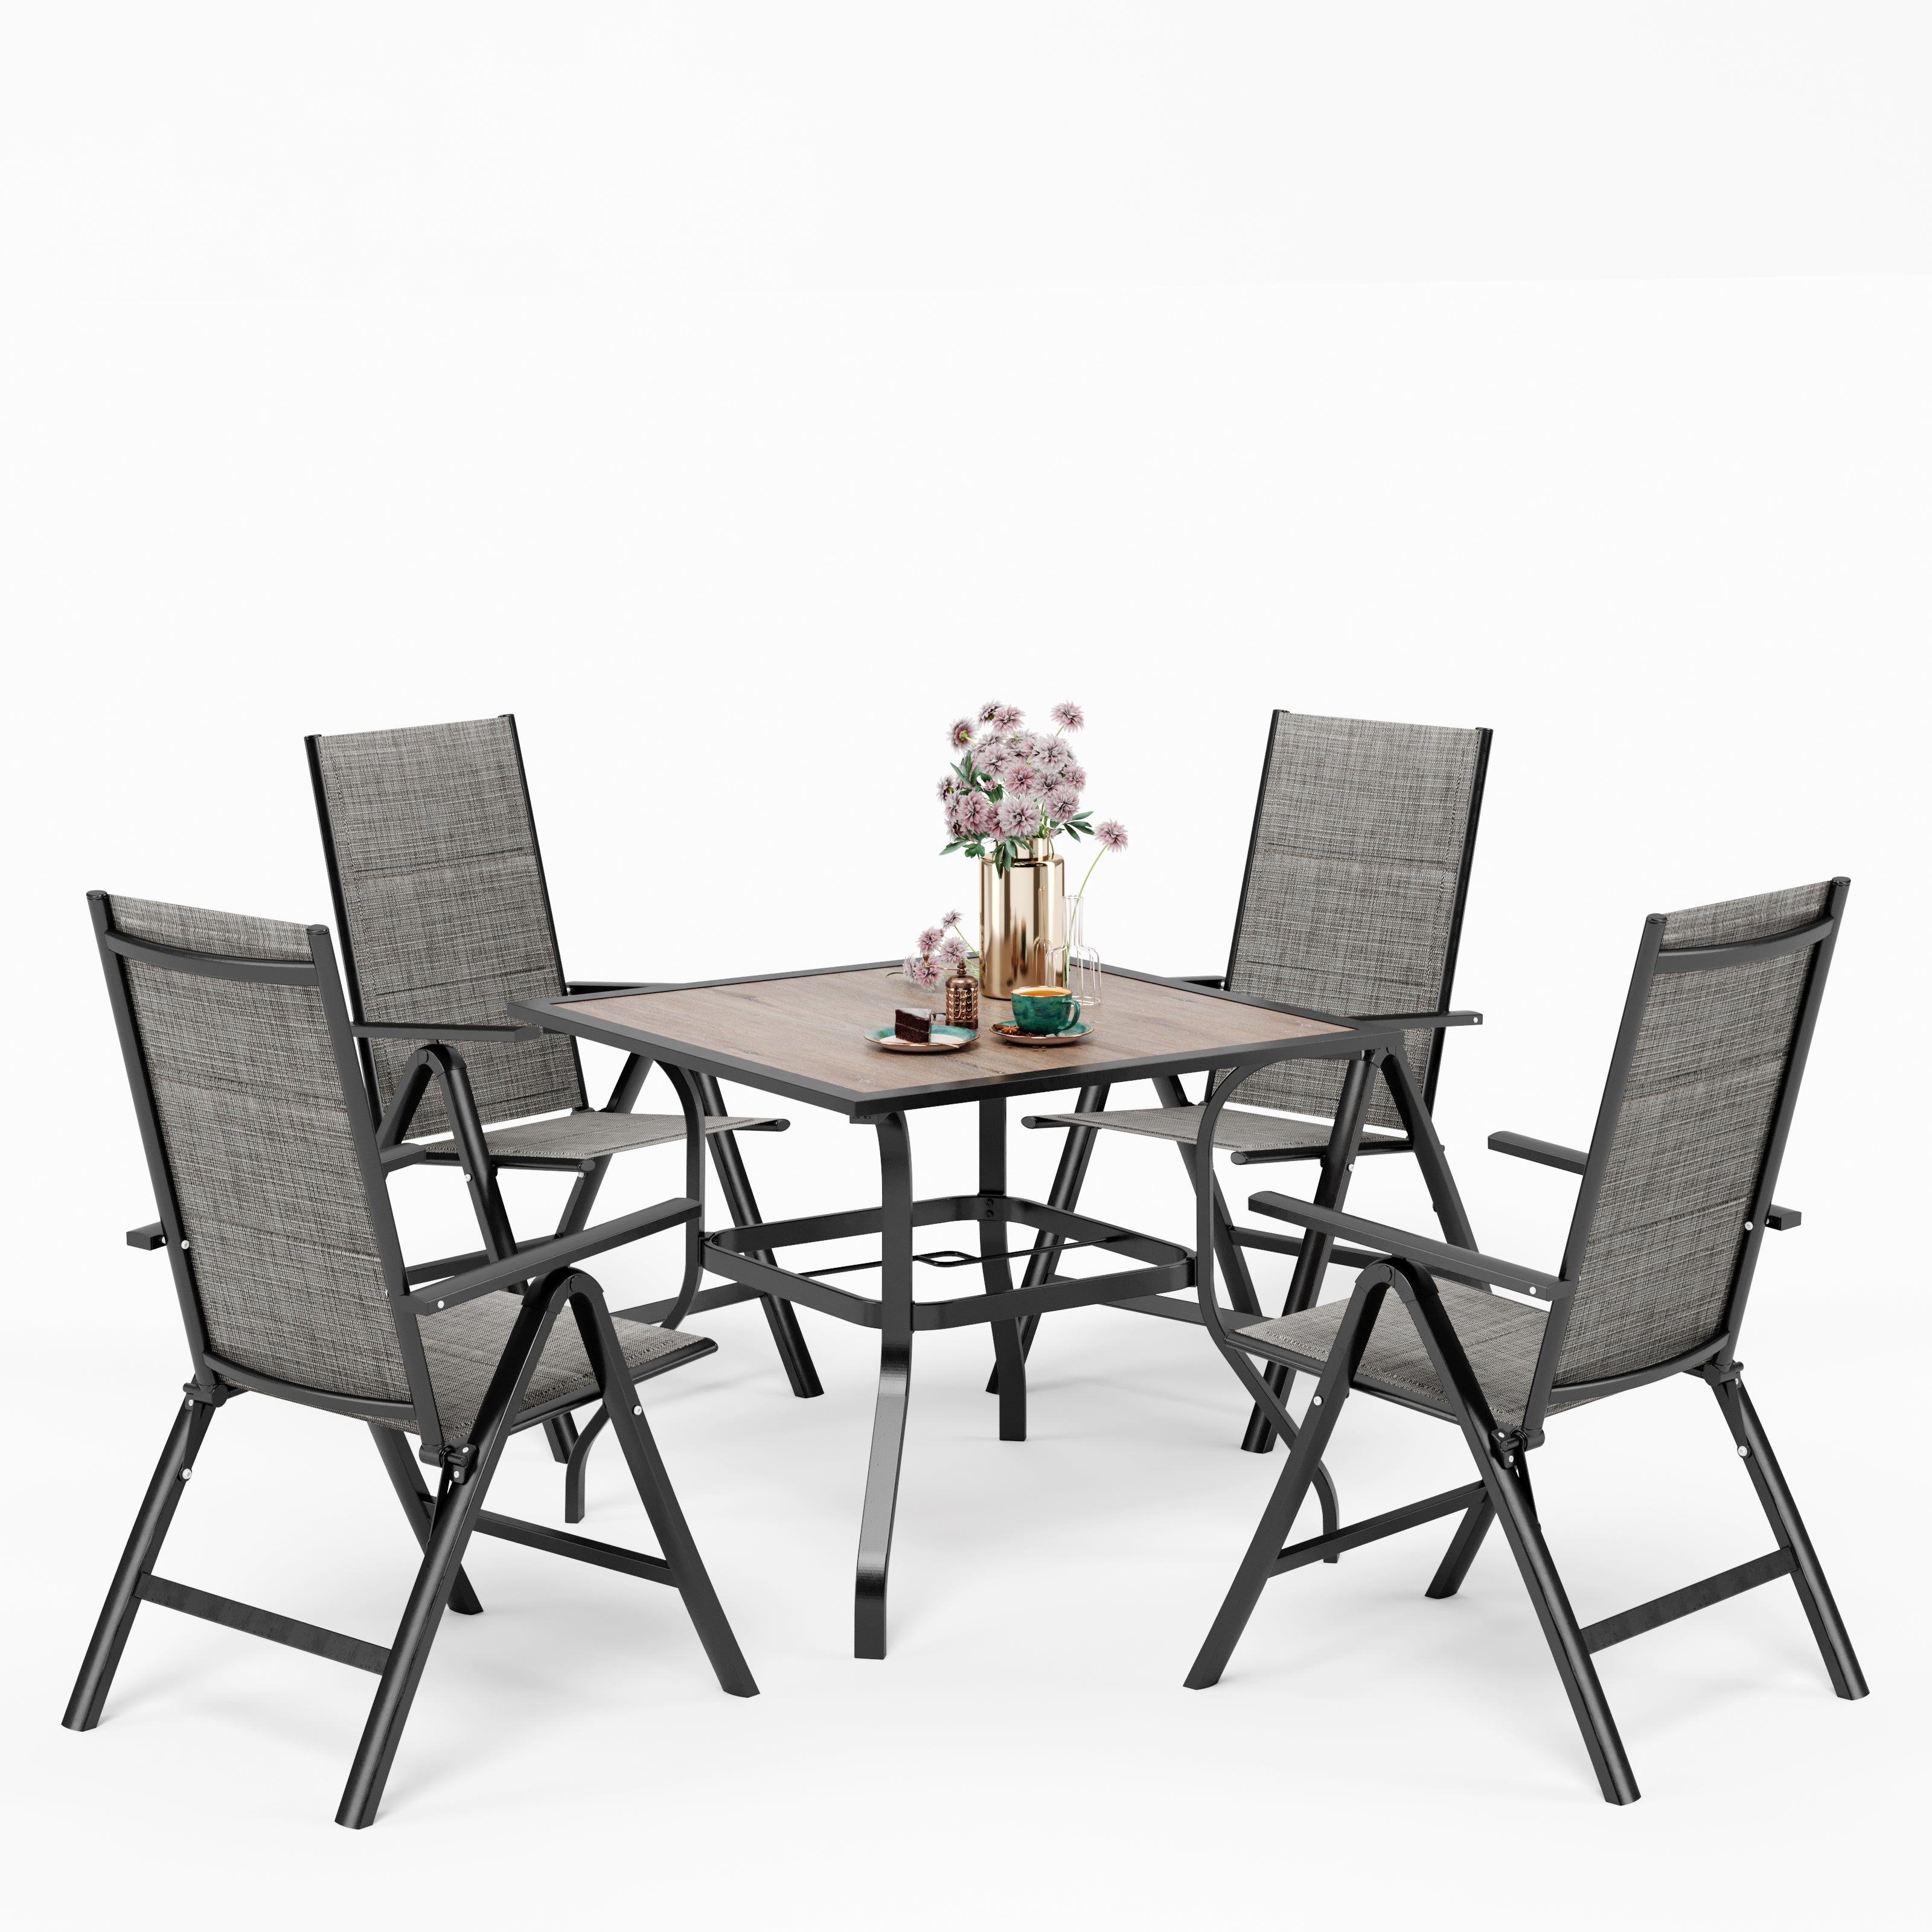 MFSTUDIO 5-Piece Wood-look Square Table & Padded Textilene Foldable Chairs Patio Dining Set